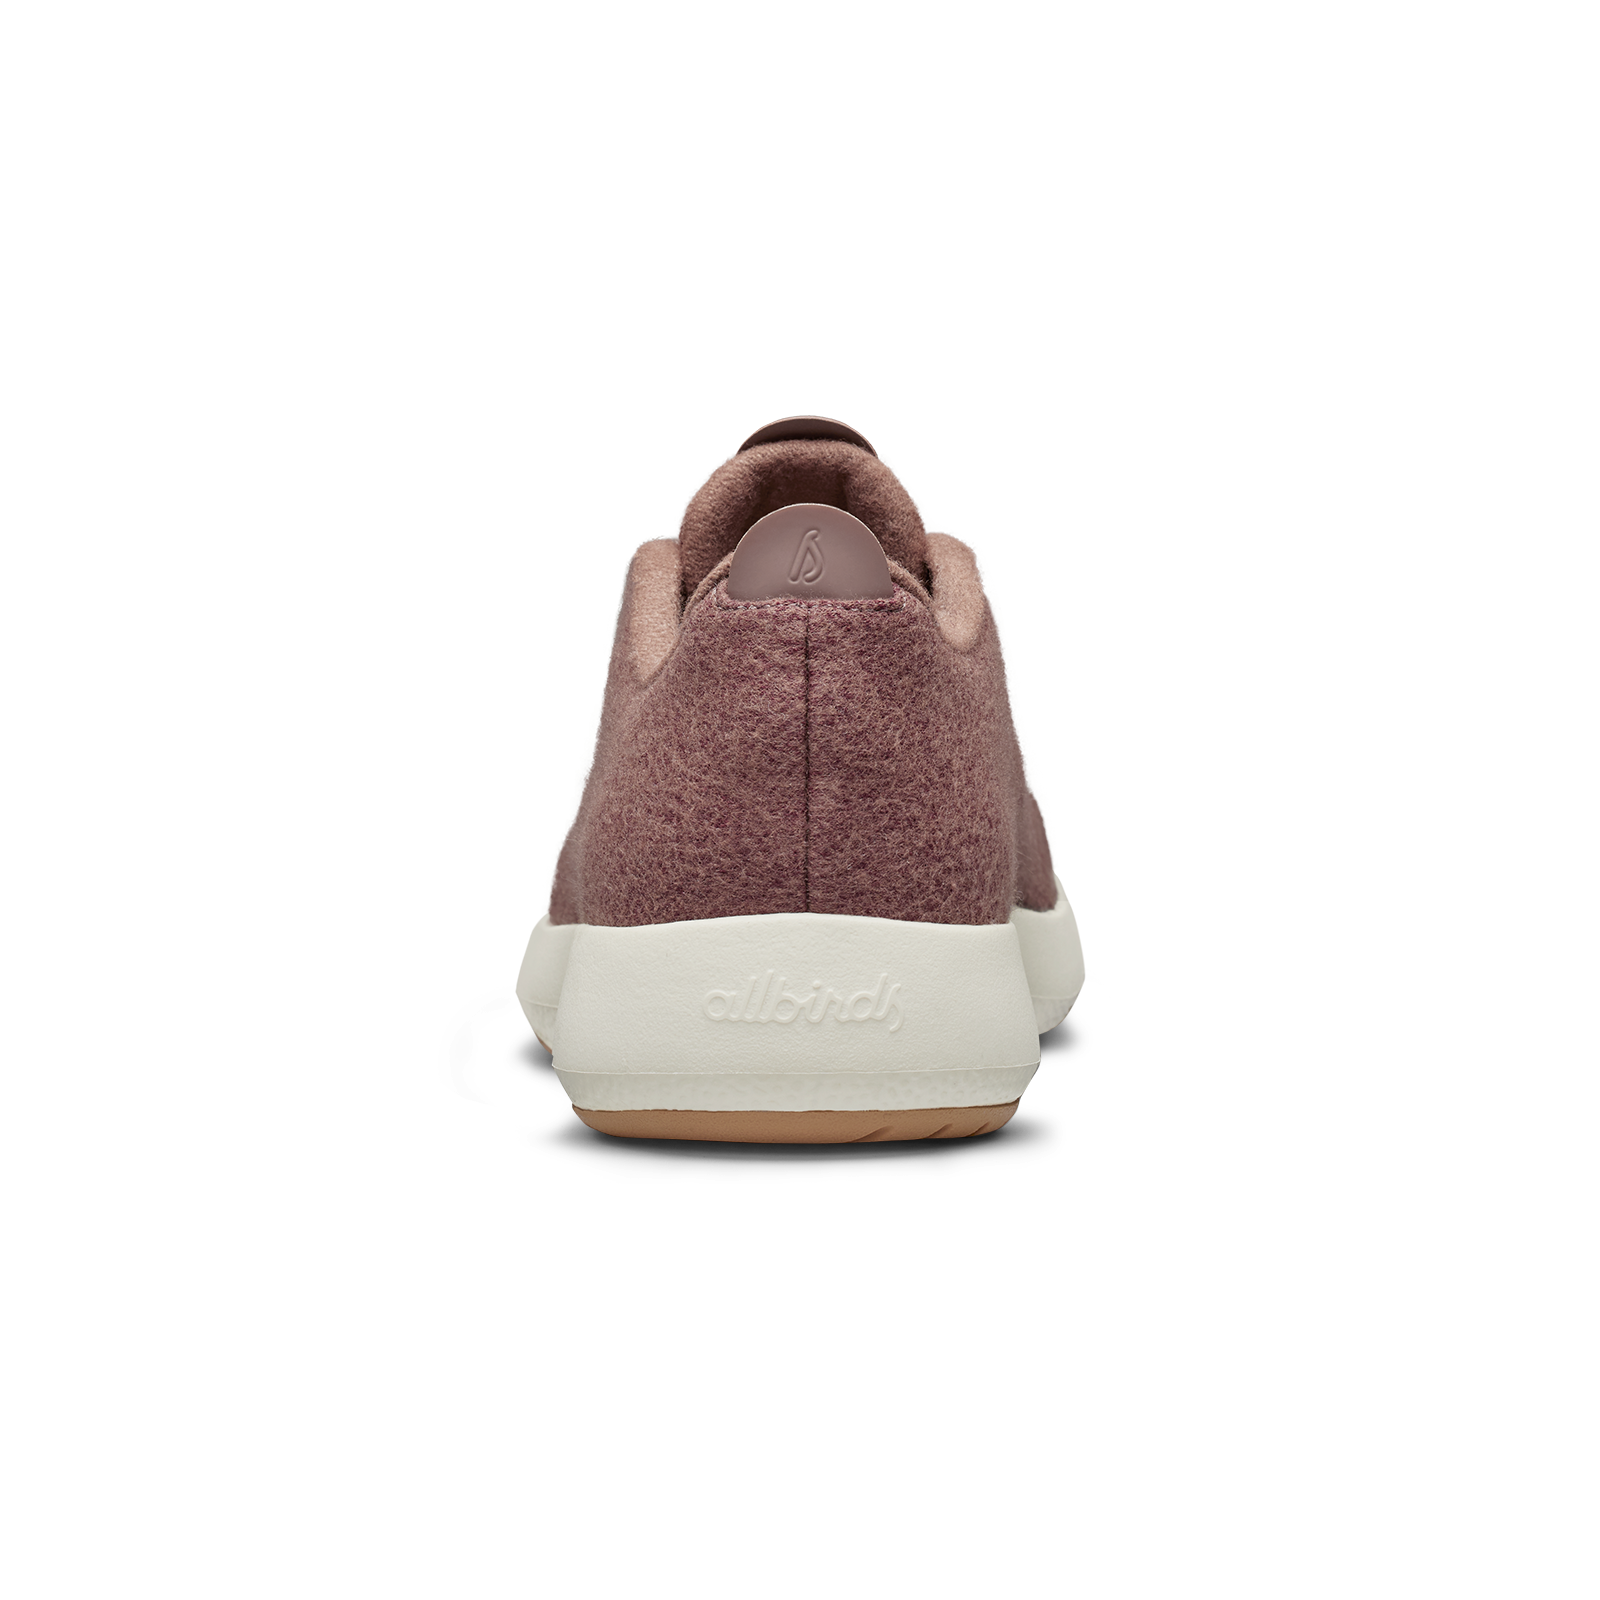 Women's Wool Runner Mizzles - Stormy Mauve (Natural White Sole